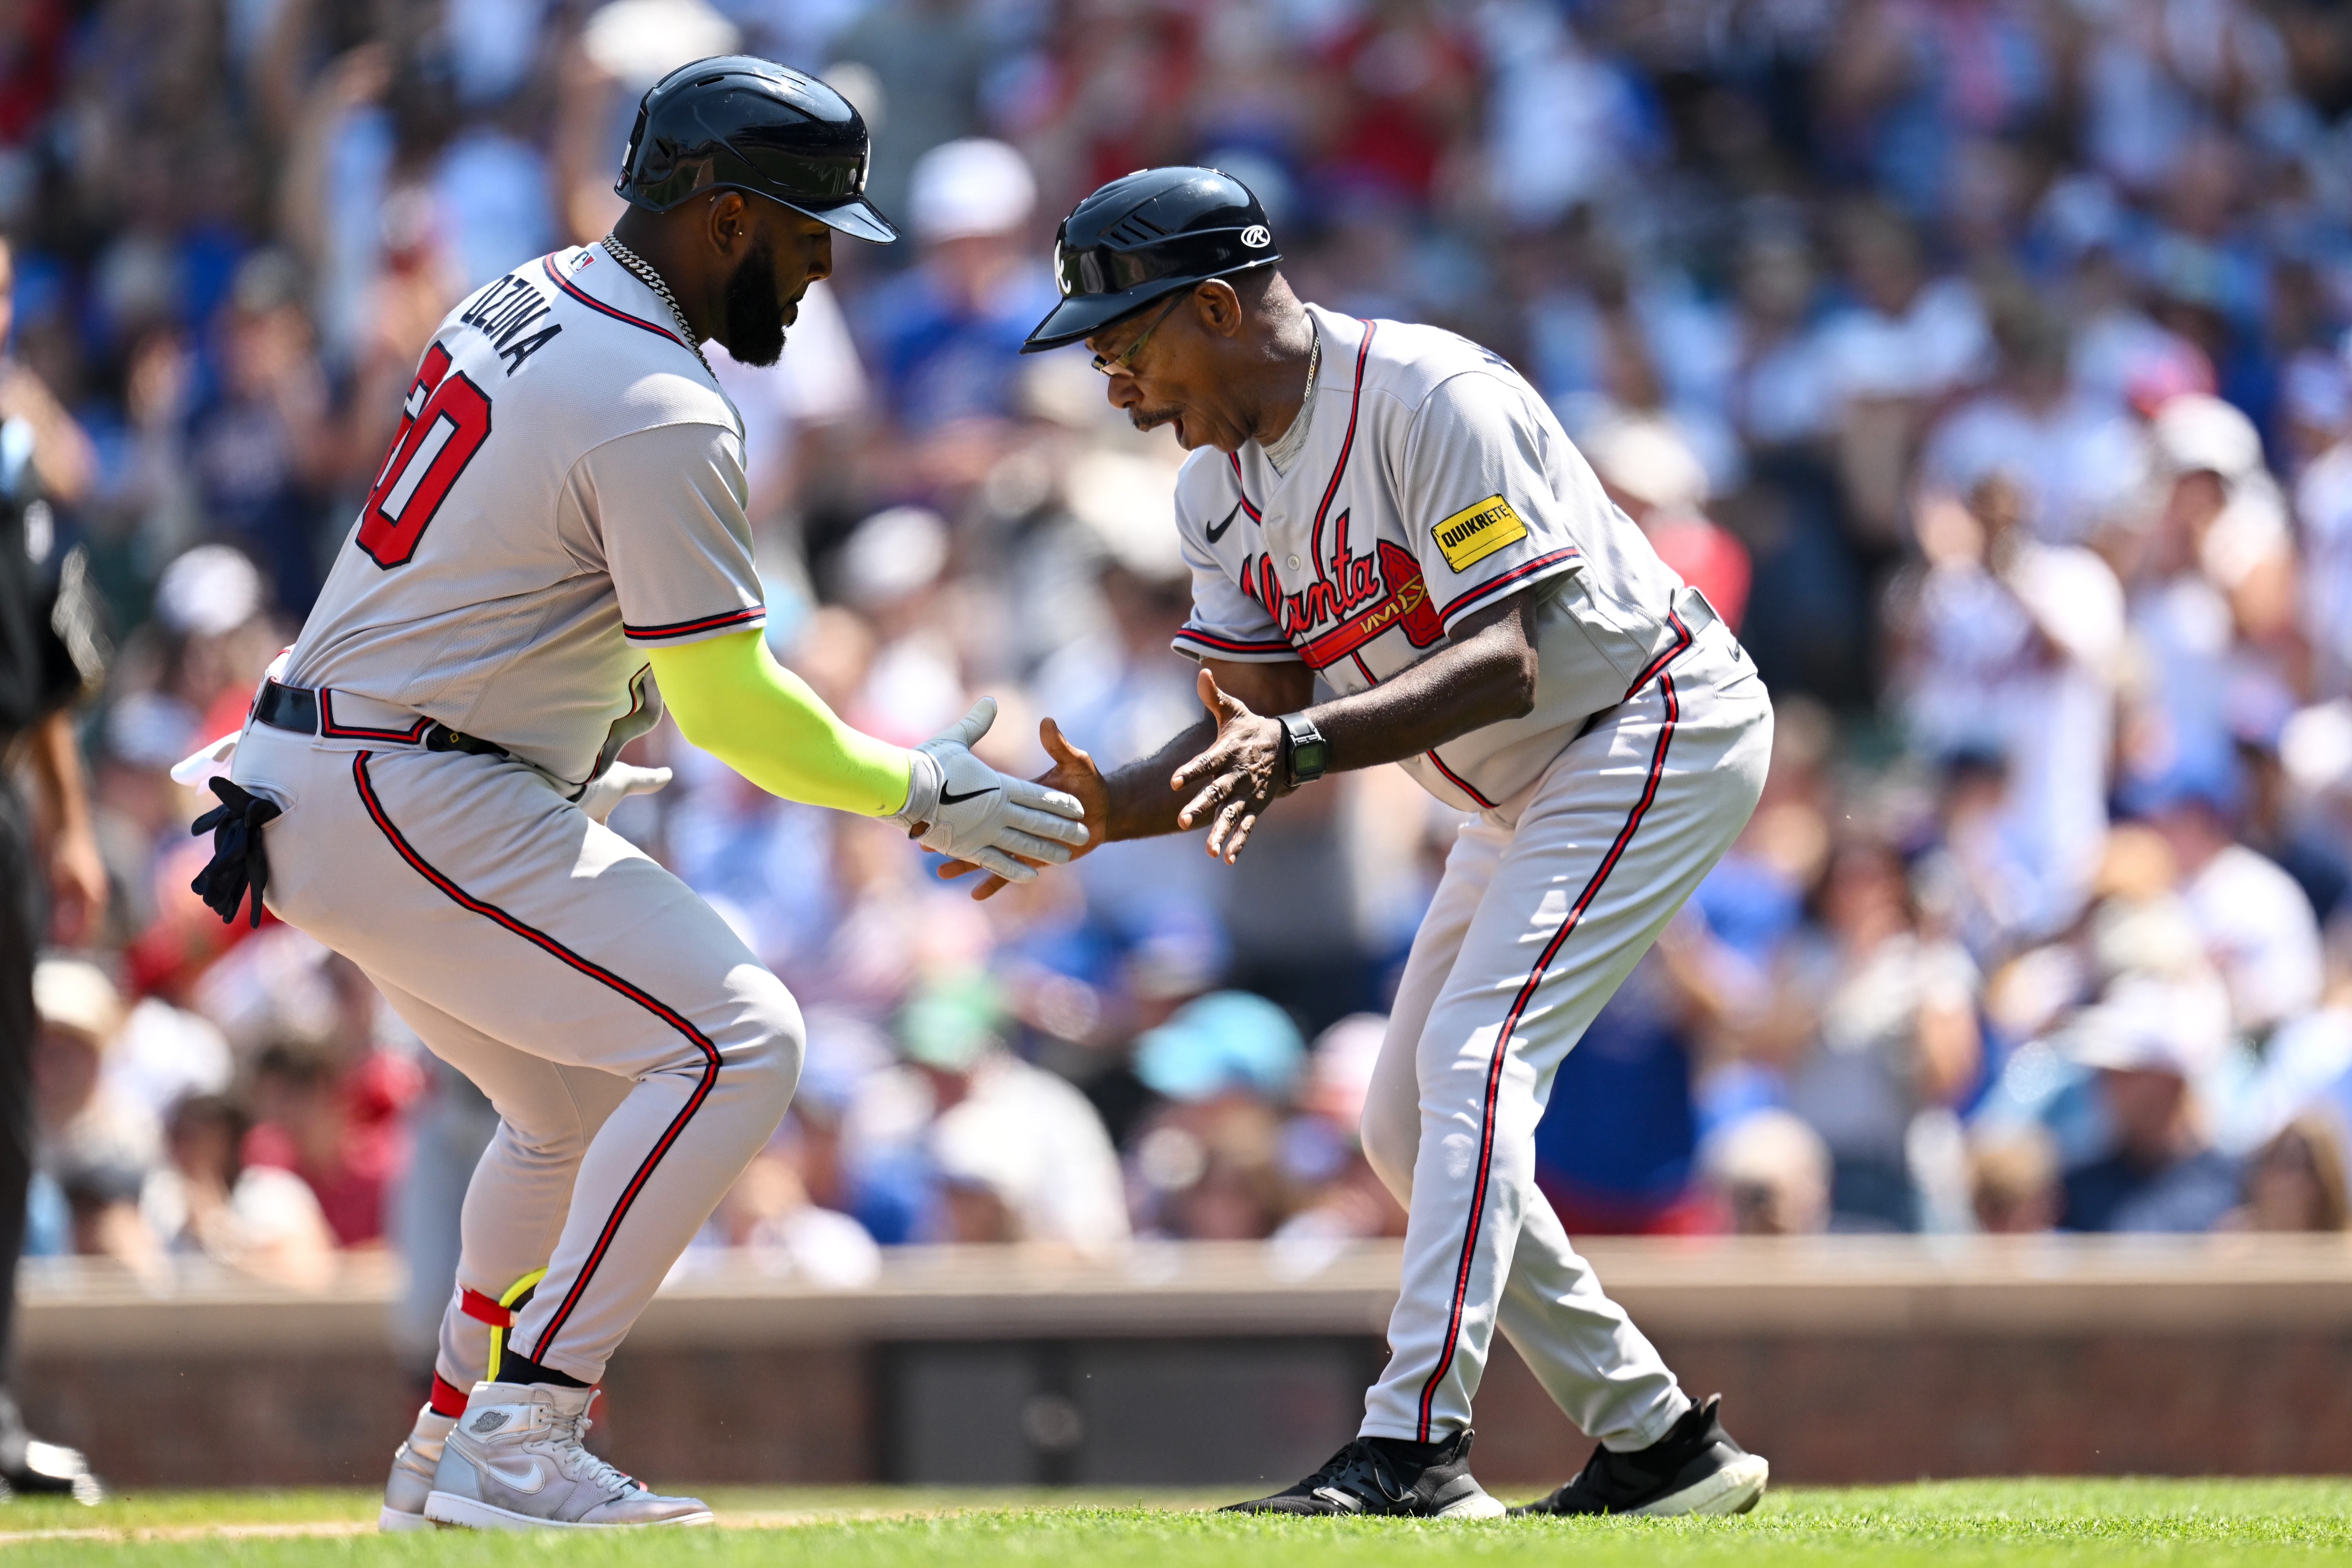 August 23: Braves 6, Pirates 1 - Battery Power